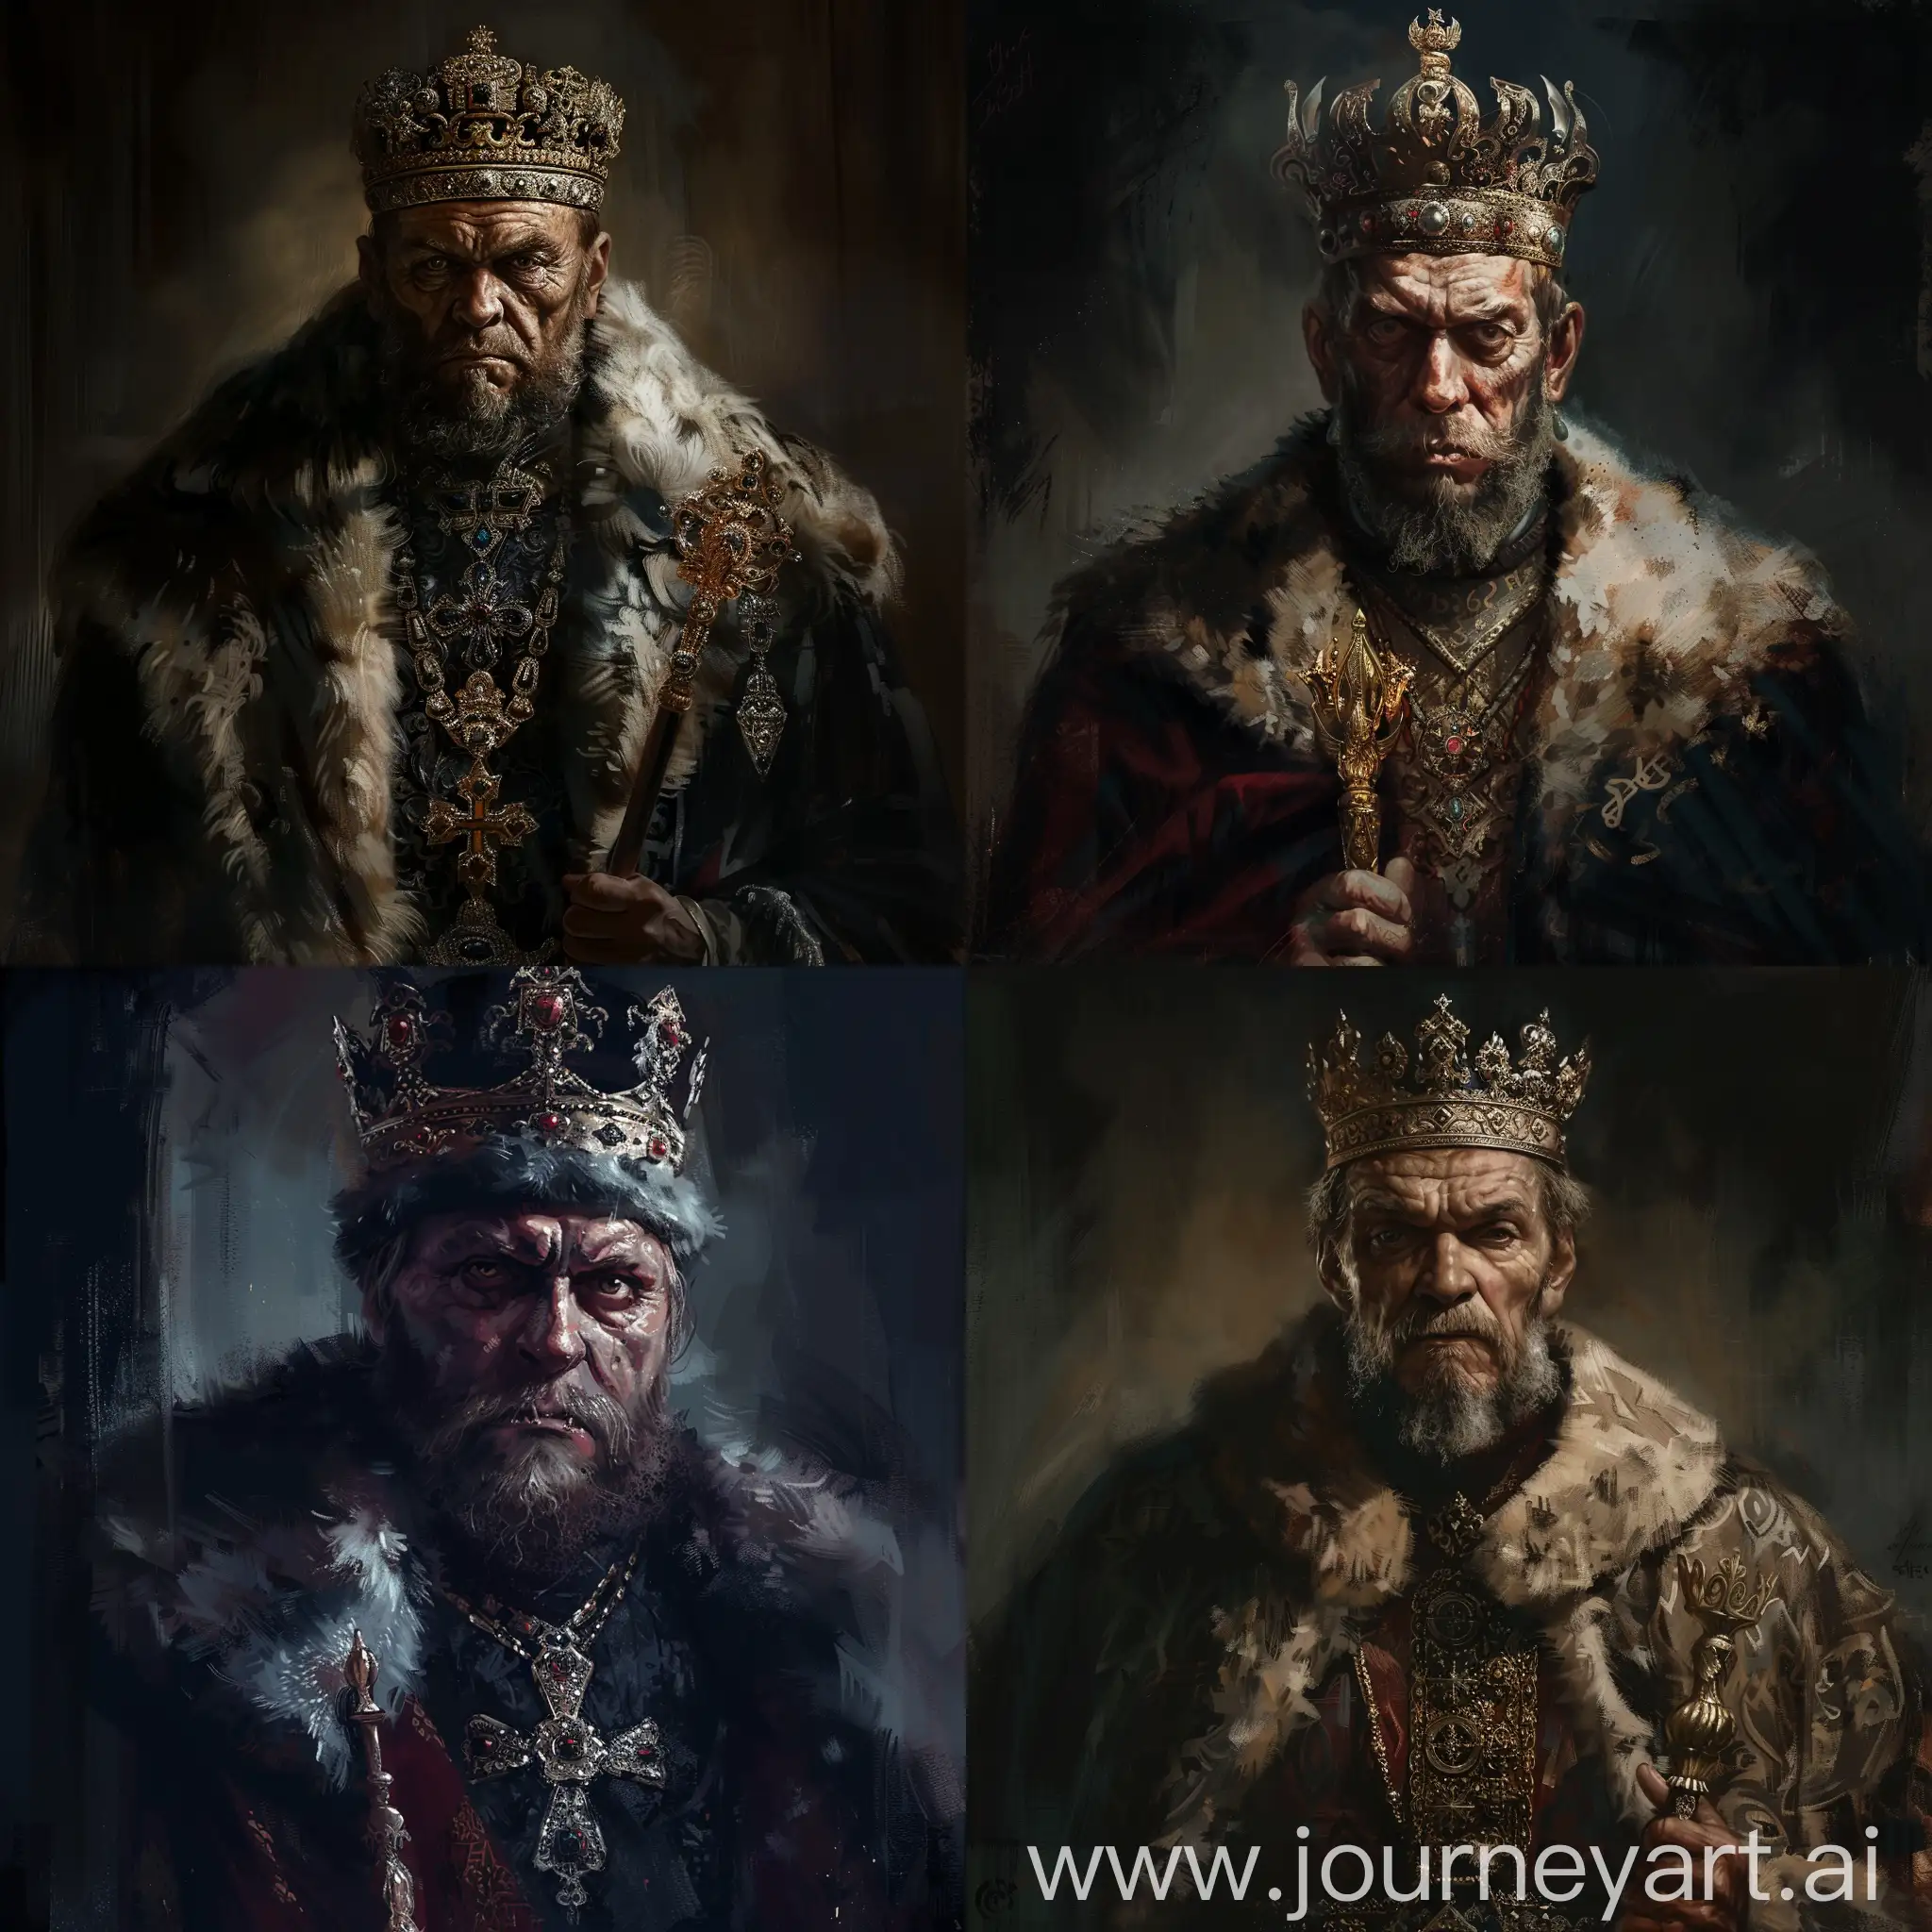 Create a portrait capturing the imposing figure of Ivan the Terrible, his gaze piercing and intense, with a crown upon his head symbolizing his authority. The background could be shrouded in darkness, hinting at his notorious reputation for cruelty and ruthlessness, while subtle details such as the fur-trimmed robes and the ornate scepter he holds add to the grandeur of his portrayal.